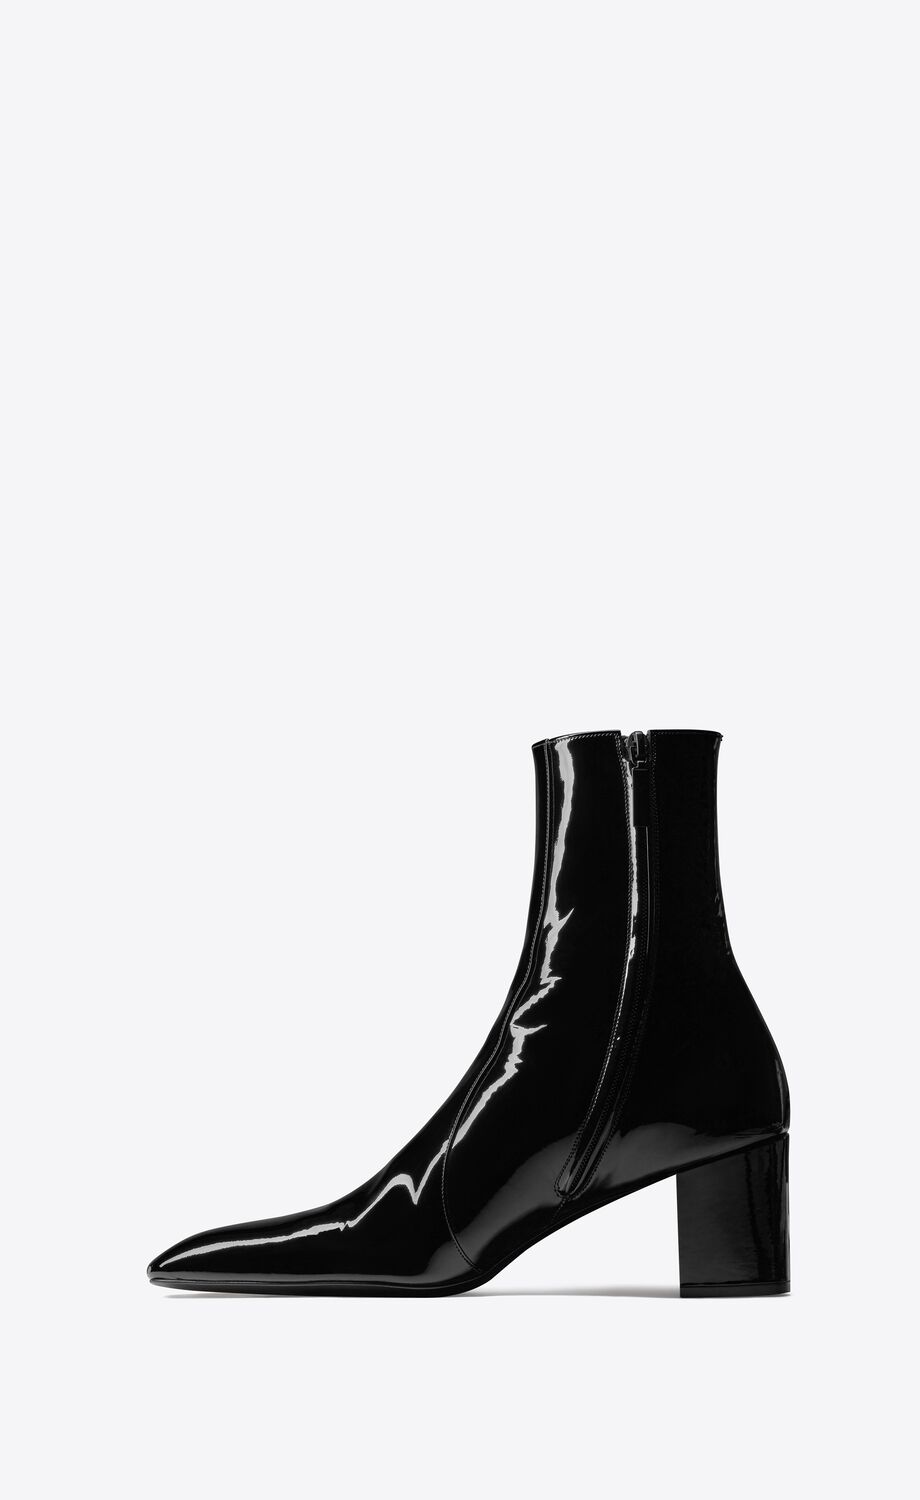 XIV zipped boots in patent leather | Saint Laurent | YSL.com